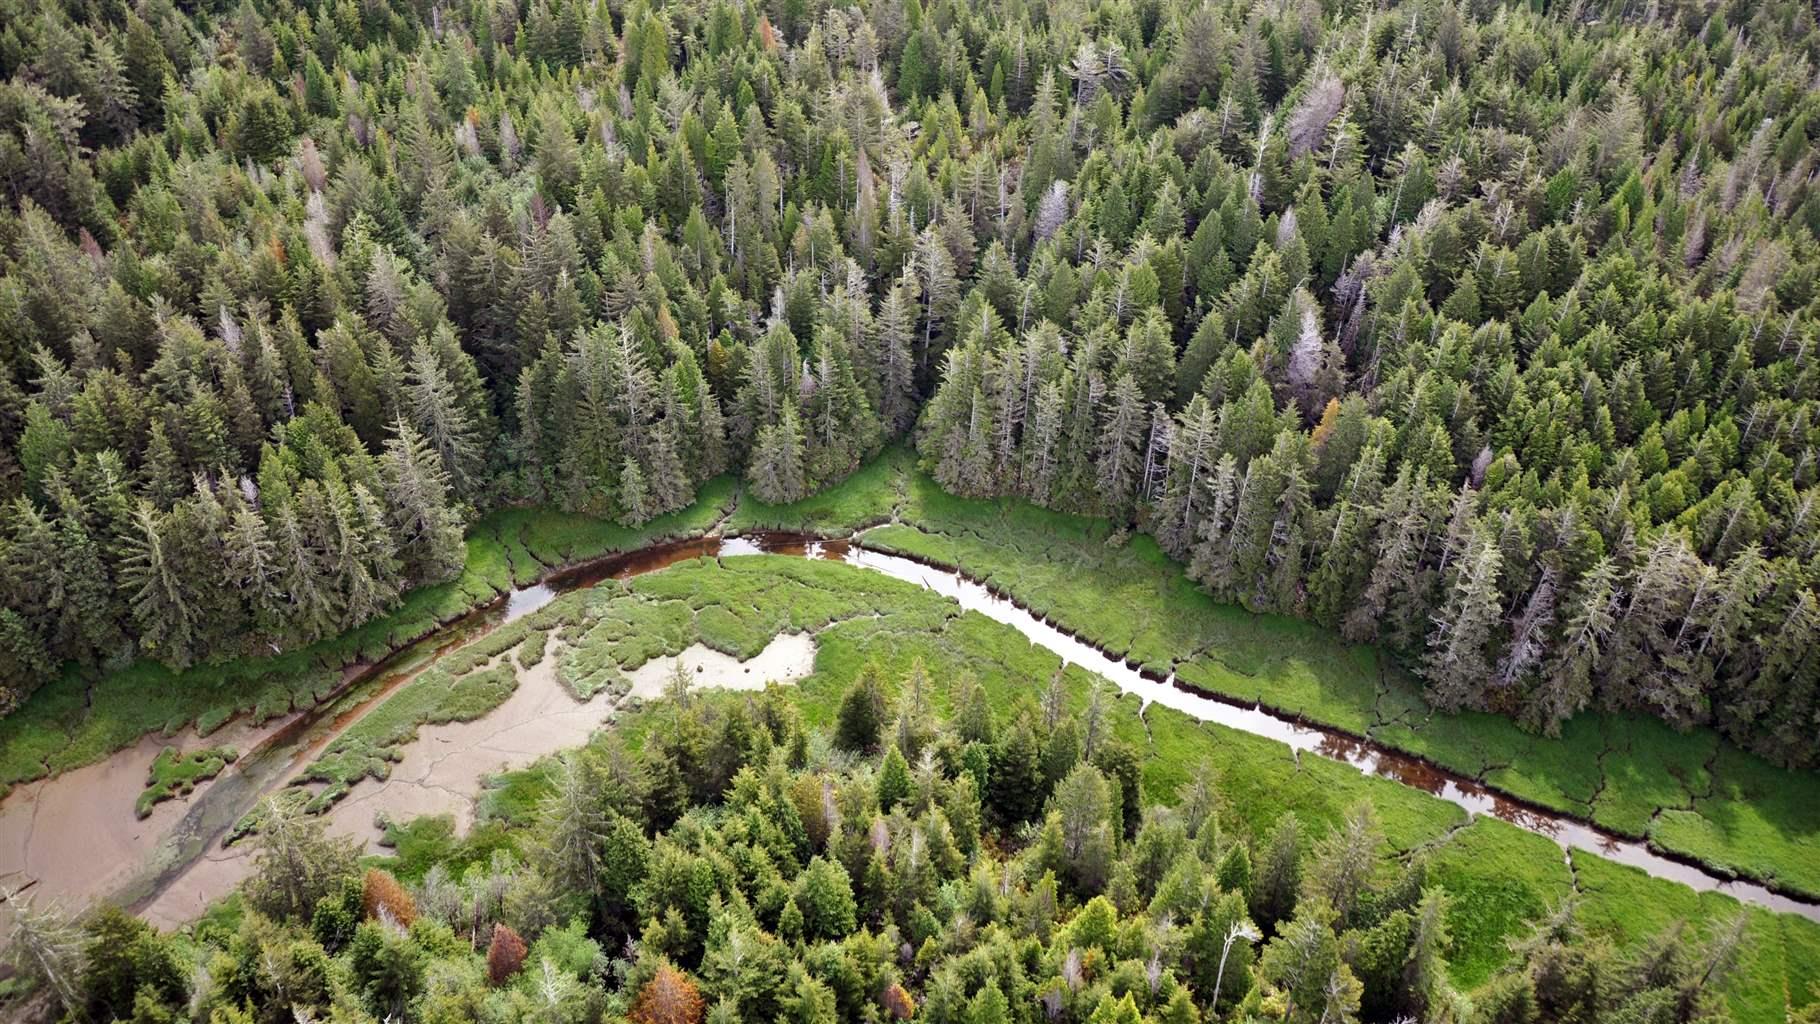 An aerial view shows a stream running through a verdant wetland, which is tightly bordered by tall conifer trees.